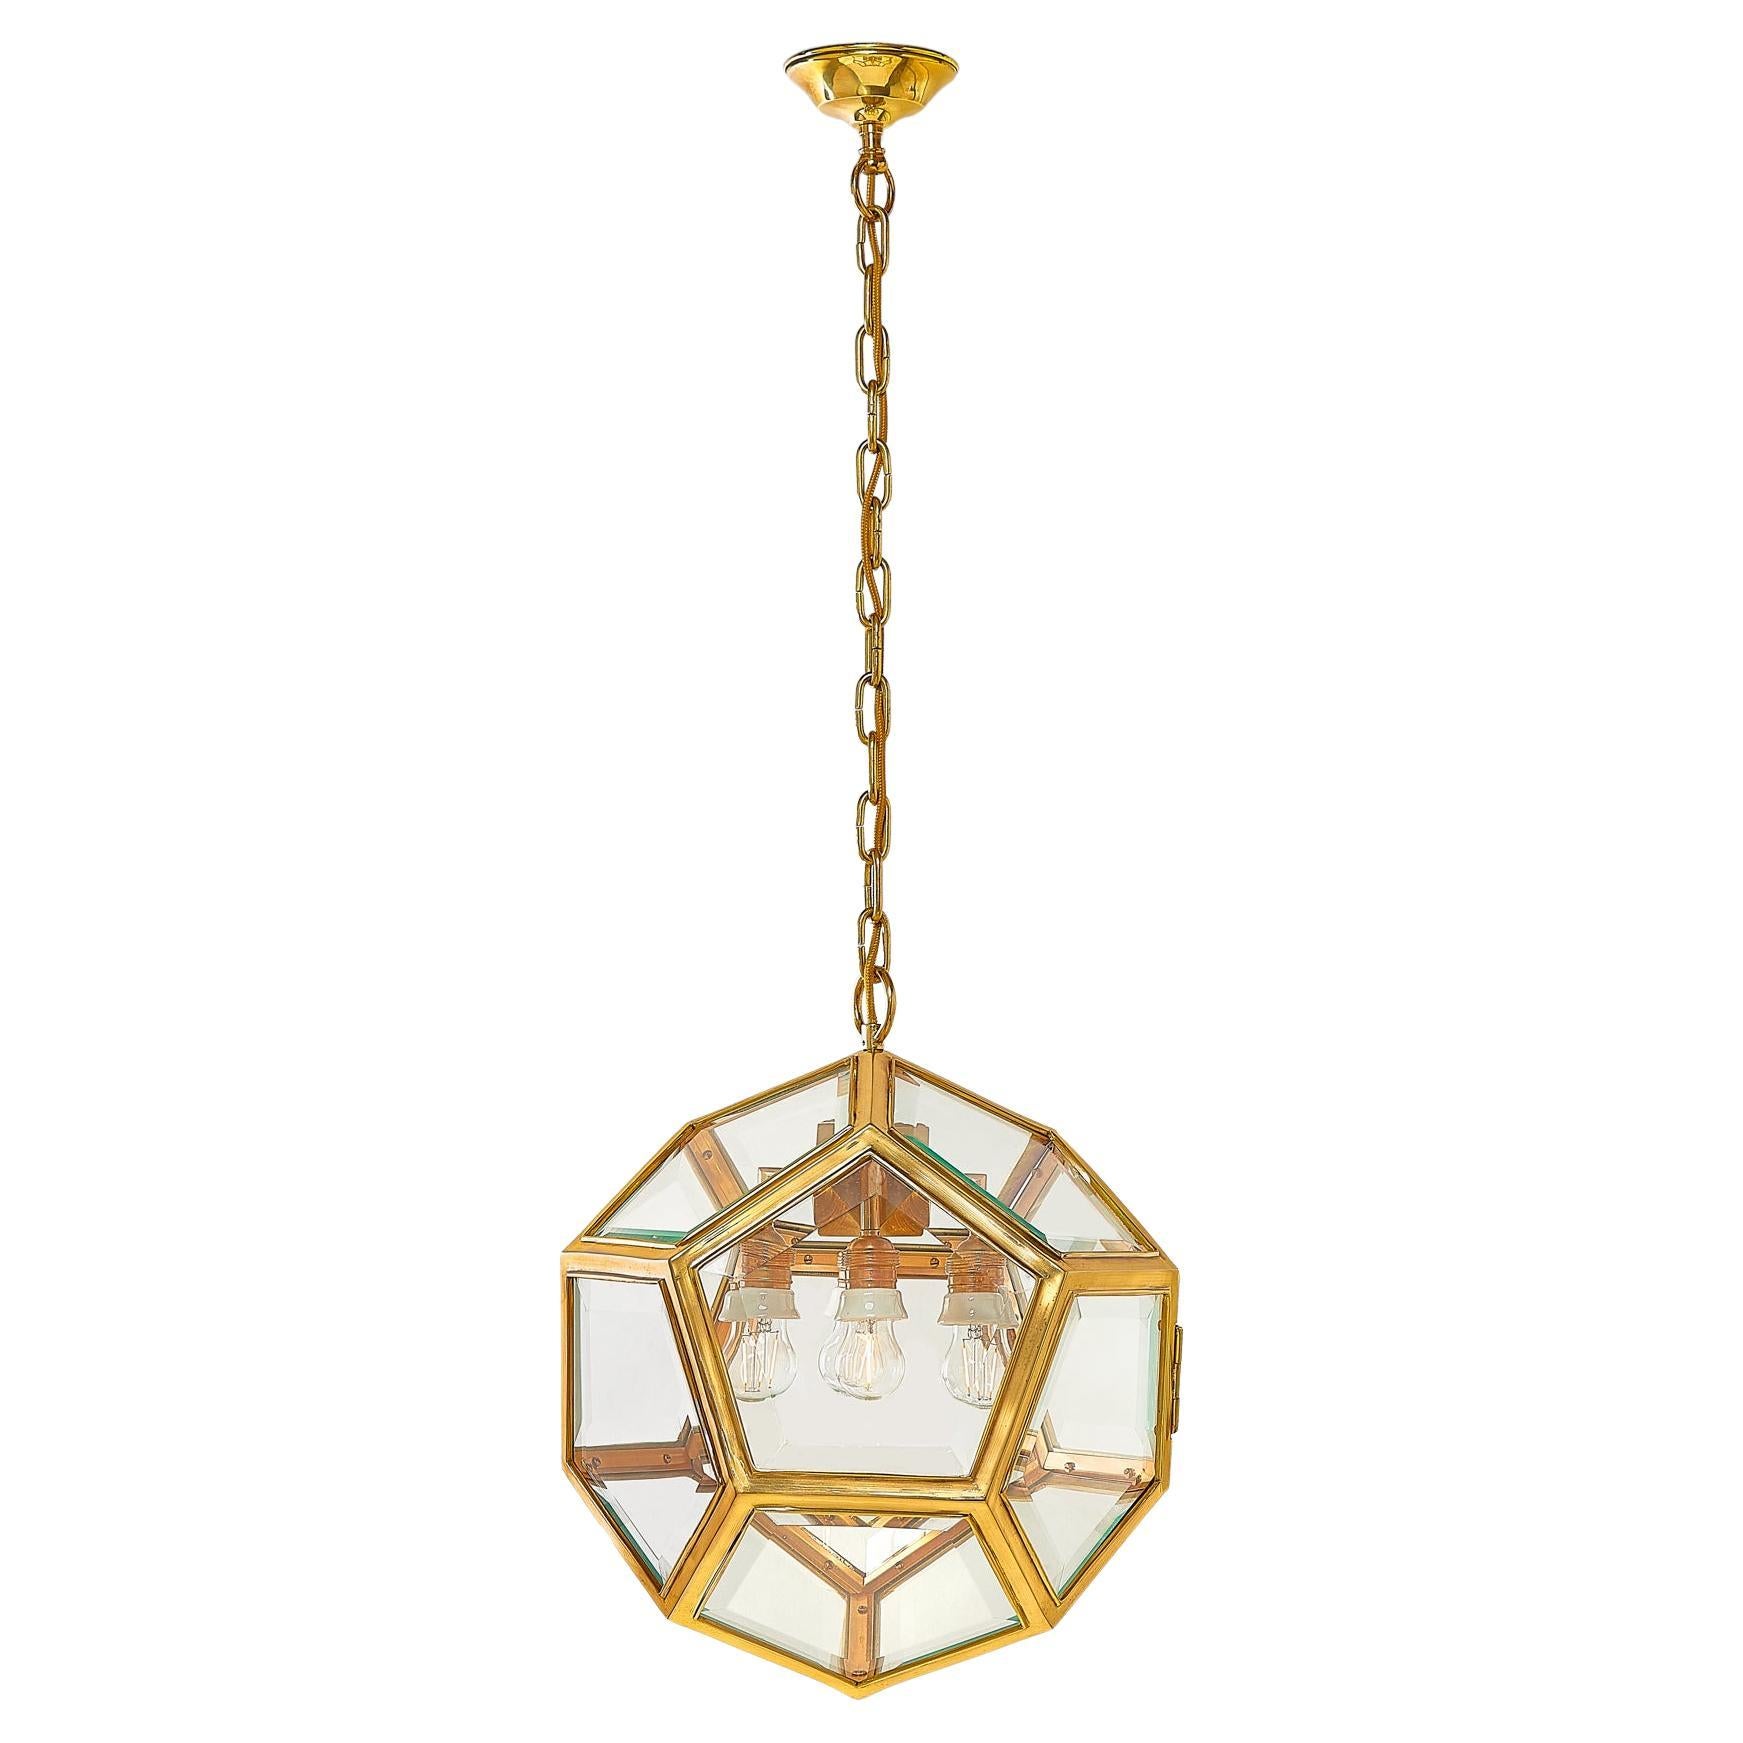 Austrian Art Nouveau Brass and Glass Dodekaeder Lamp by Adolf Loos